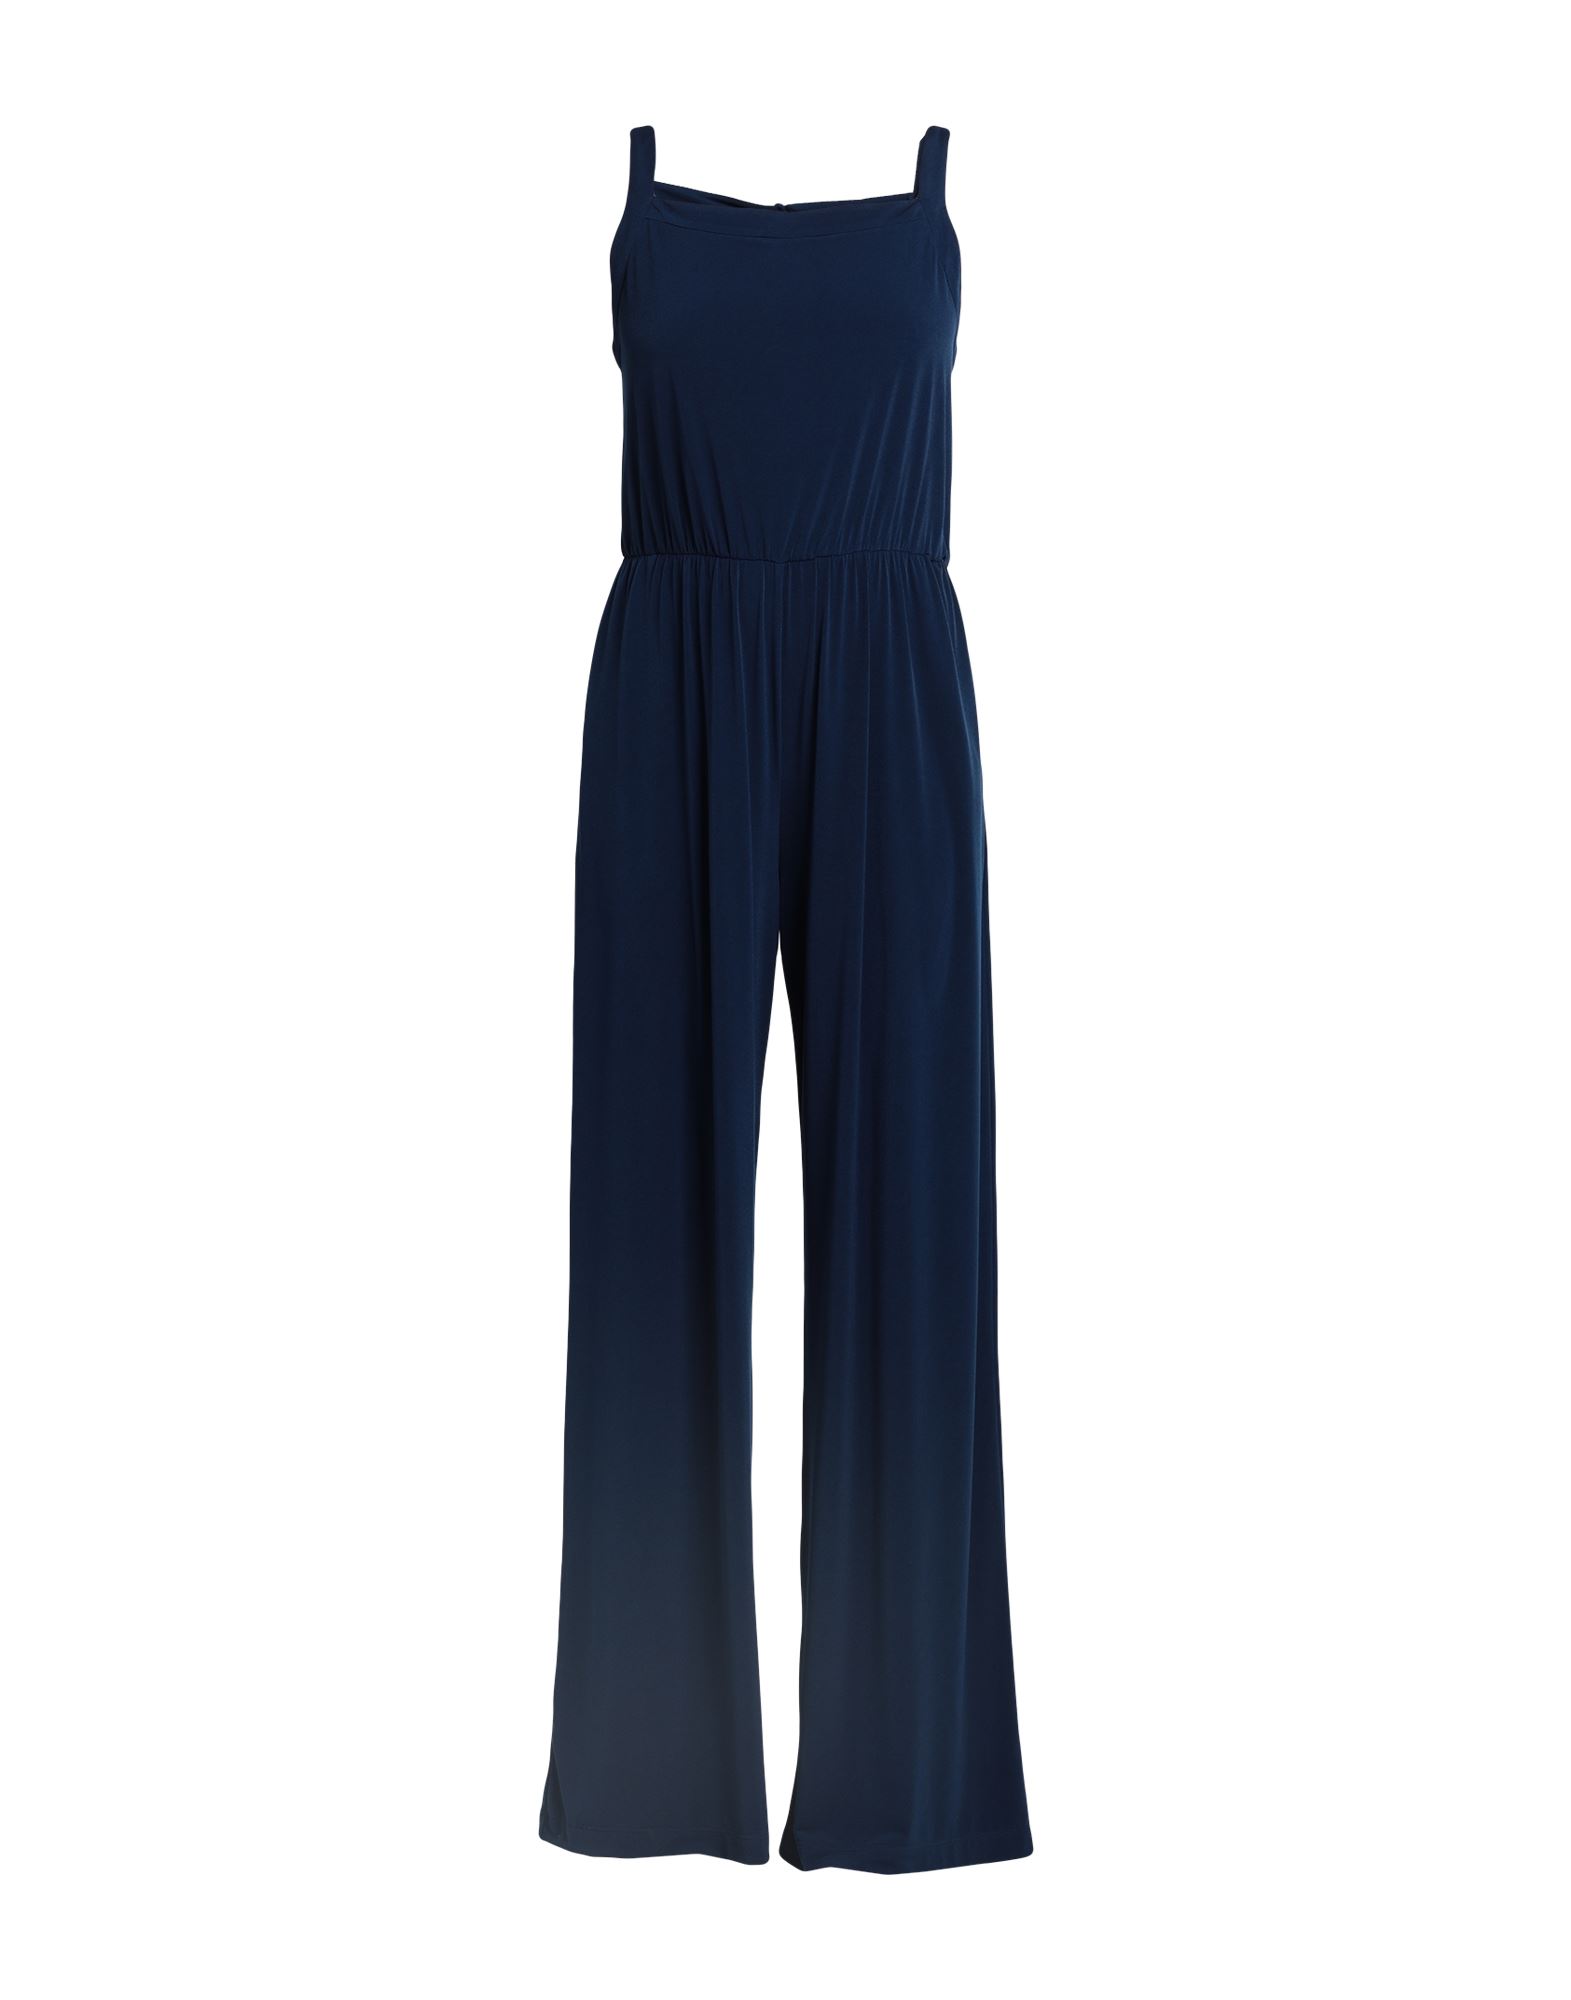 Biancoghiaccio Jumpsuits In Navy Blue